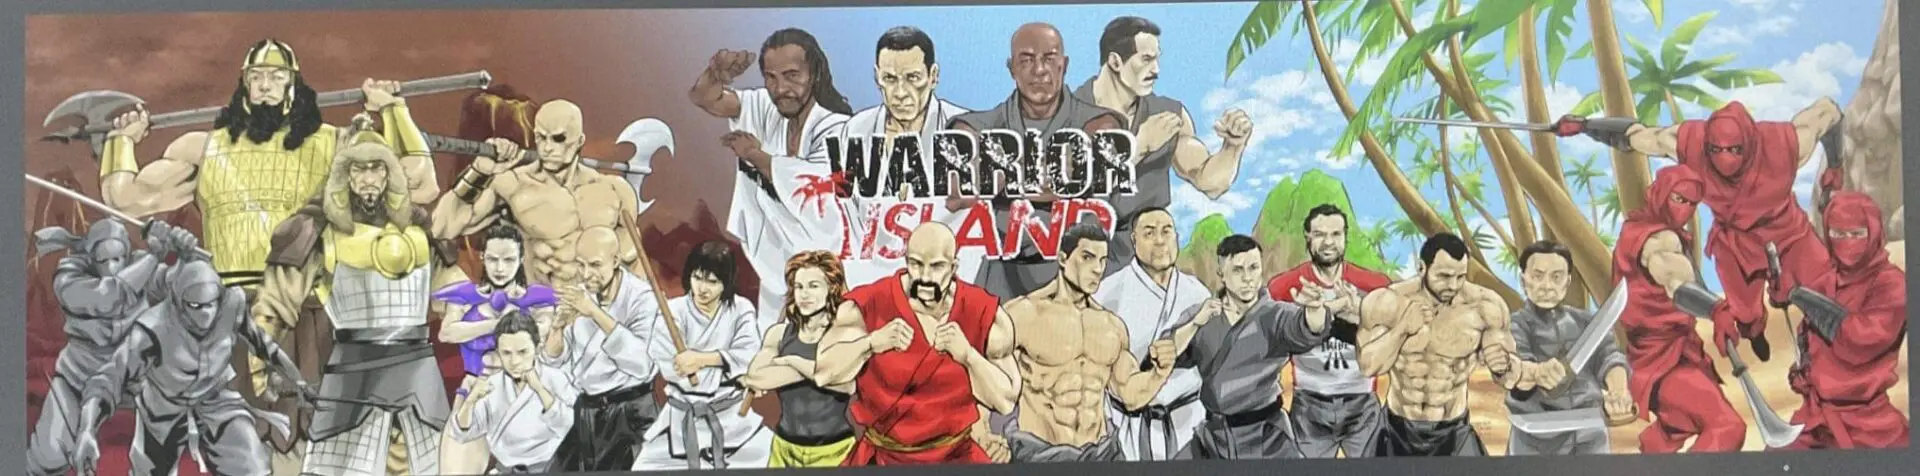 Cover poster of warrior island